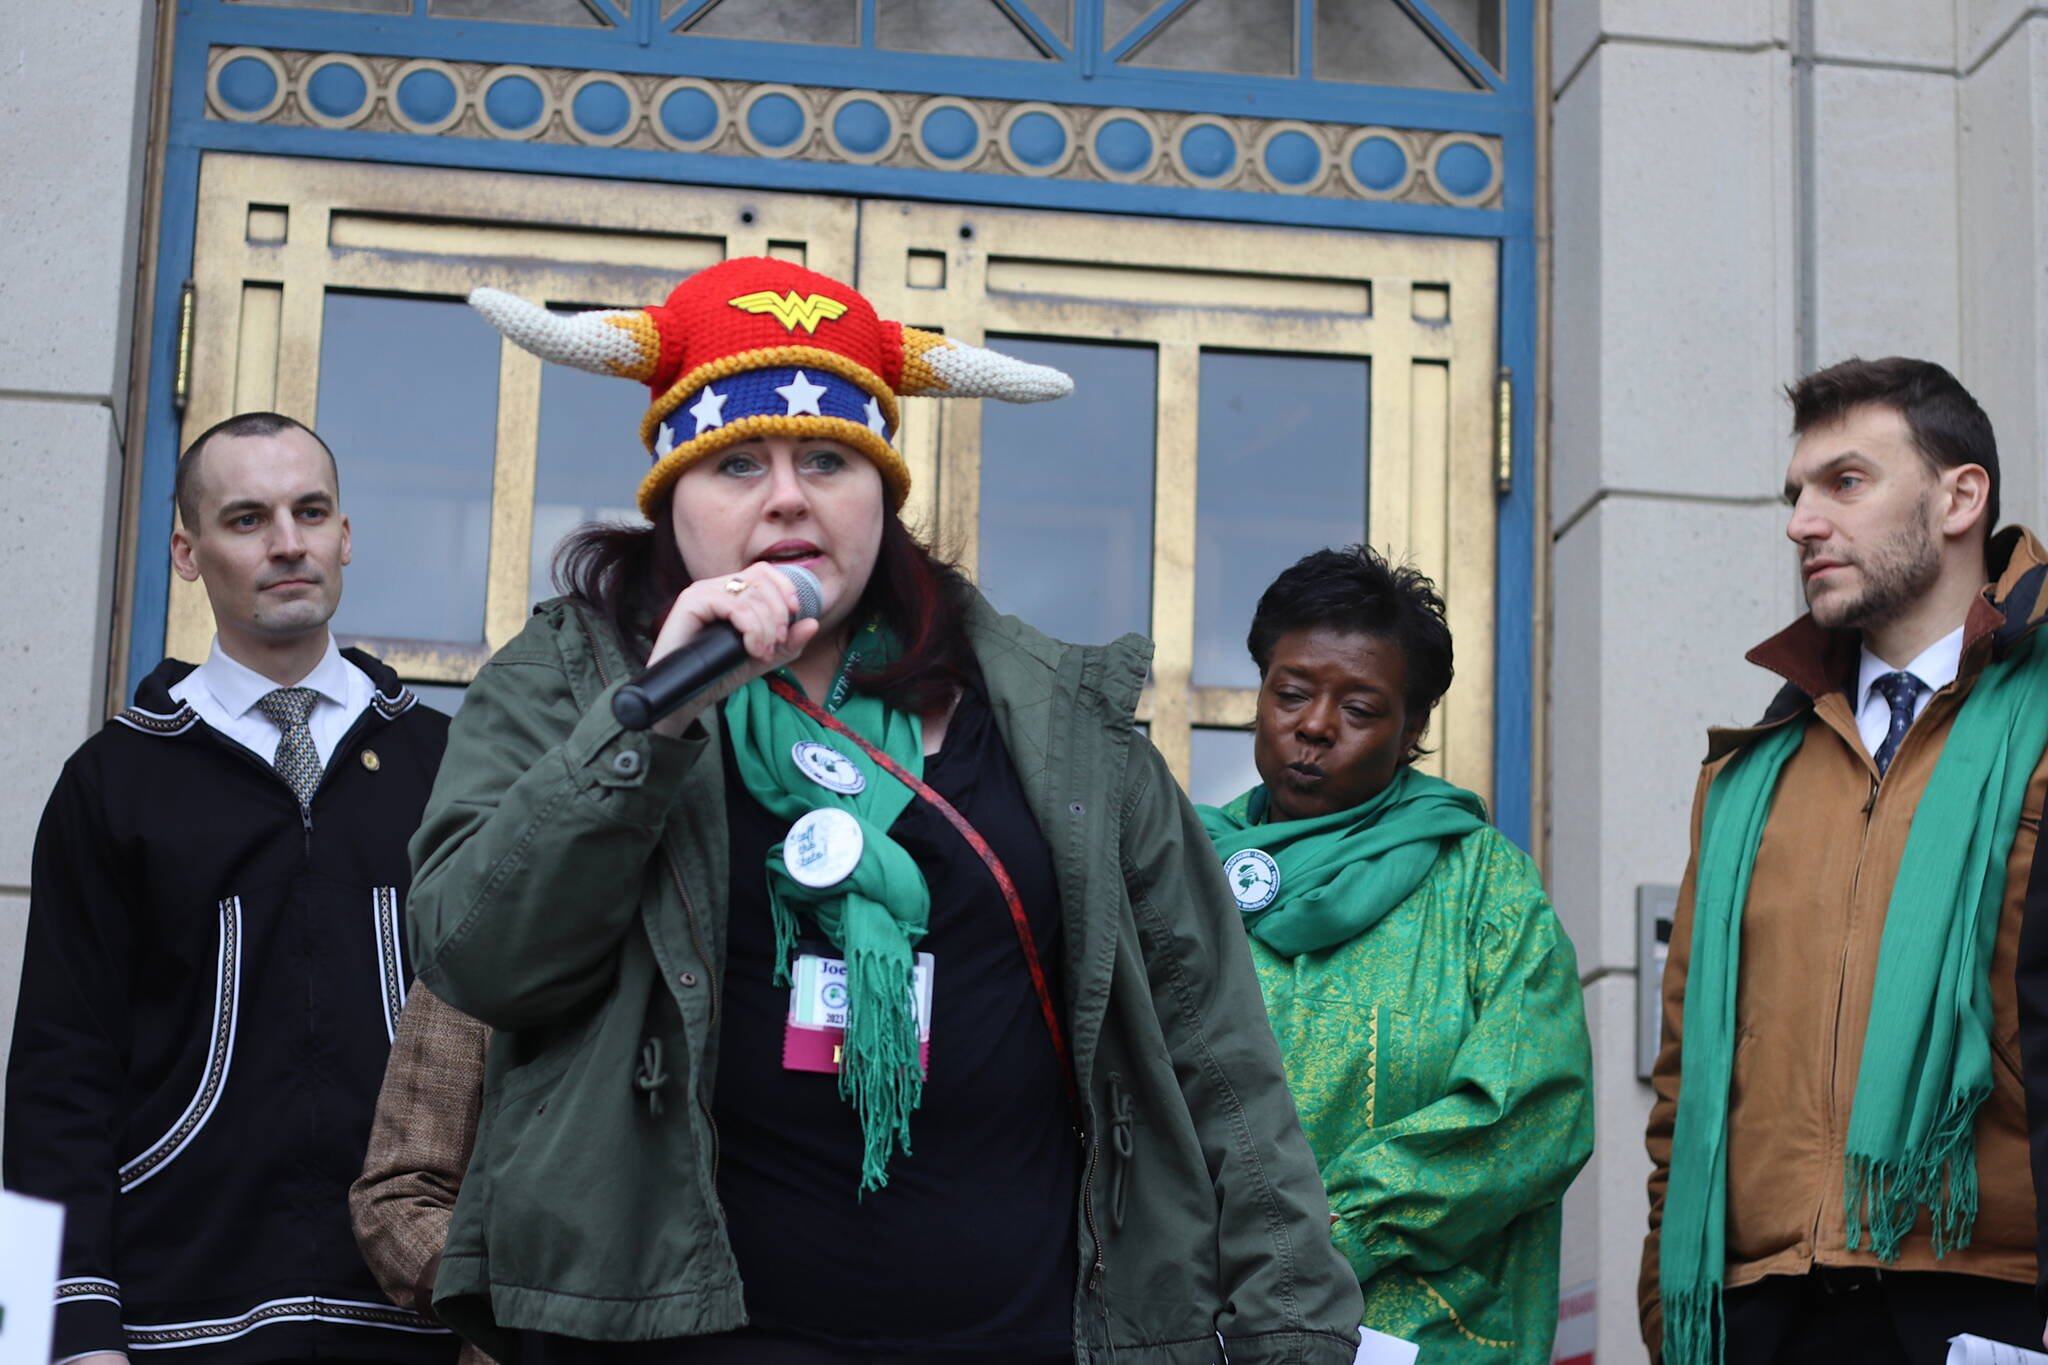 Joey Tillson, a state Division of Public Assistance employee in Ketchikan, addresses a state employees’ rally while wearing what she called a warrior hat in front of the Alaska State Capitol on Friday. Participants are trying to convince lawmakers to remedy staffing shortages allegedly caused by problems such as poor wages and poor treatment. (Mark Sabbatini / Juneau Empire)